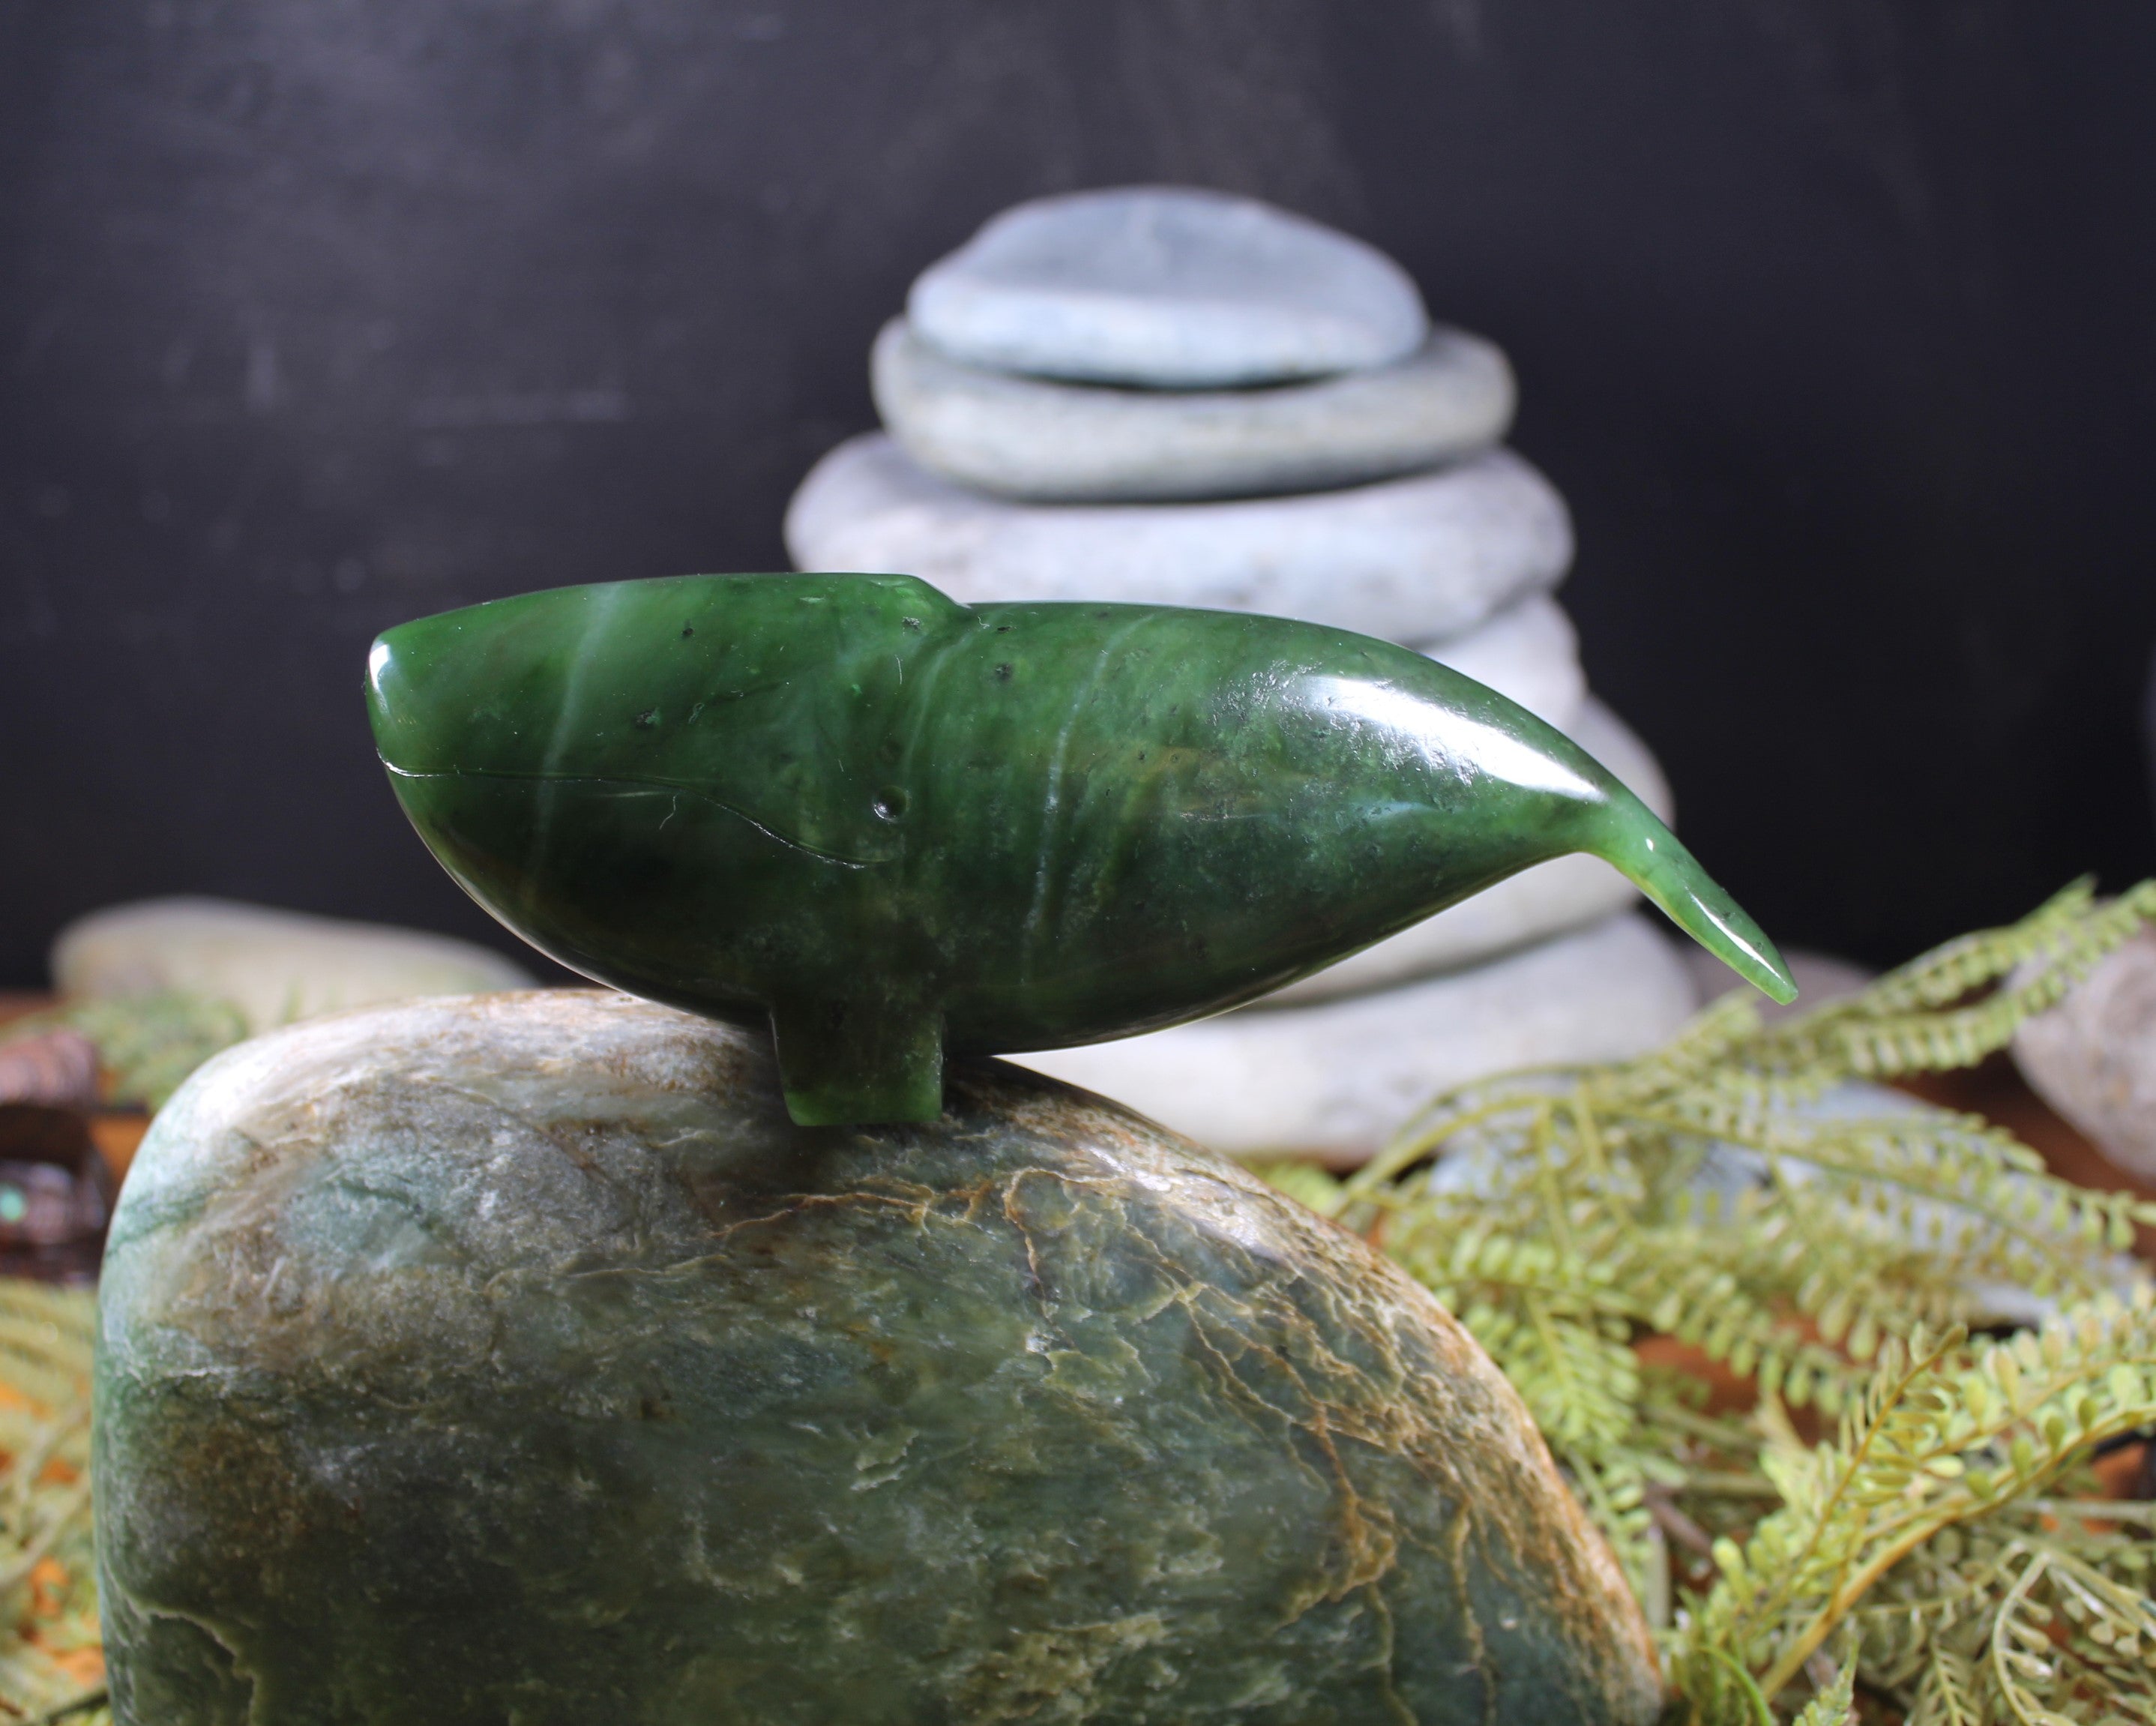 Whale Song Sculpture 1 carved from Hapopo Pounamu - NZ Greenstone